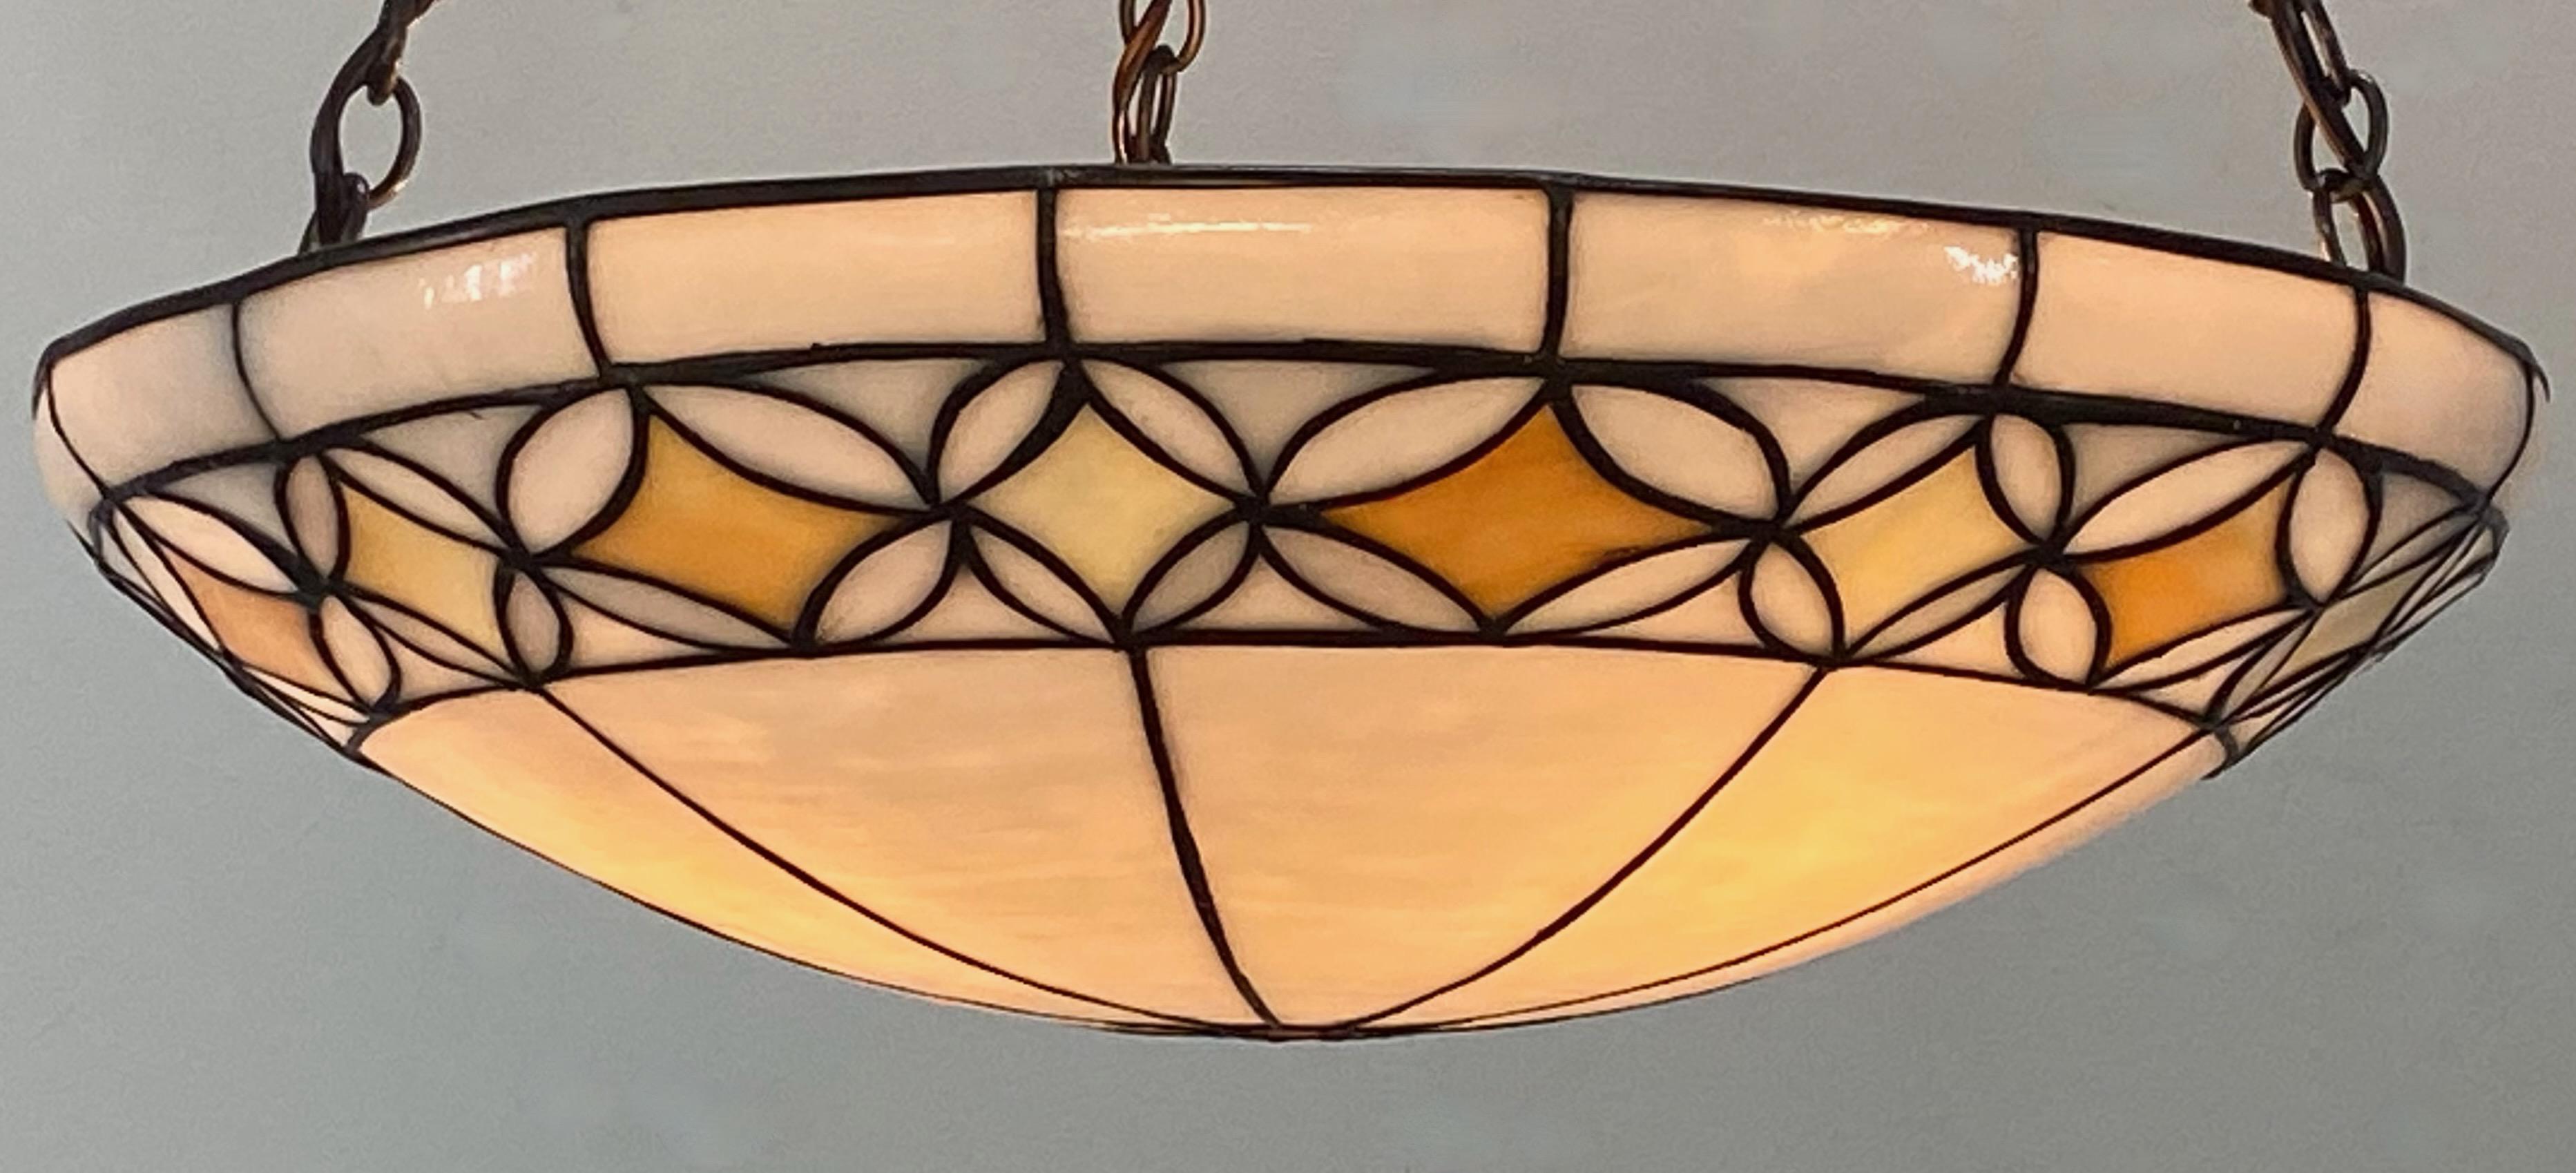 Antique Leaded Glass Pendant Light Fixture, American Early 20th Century 4